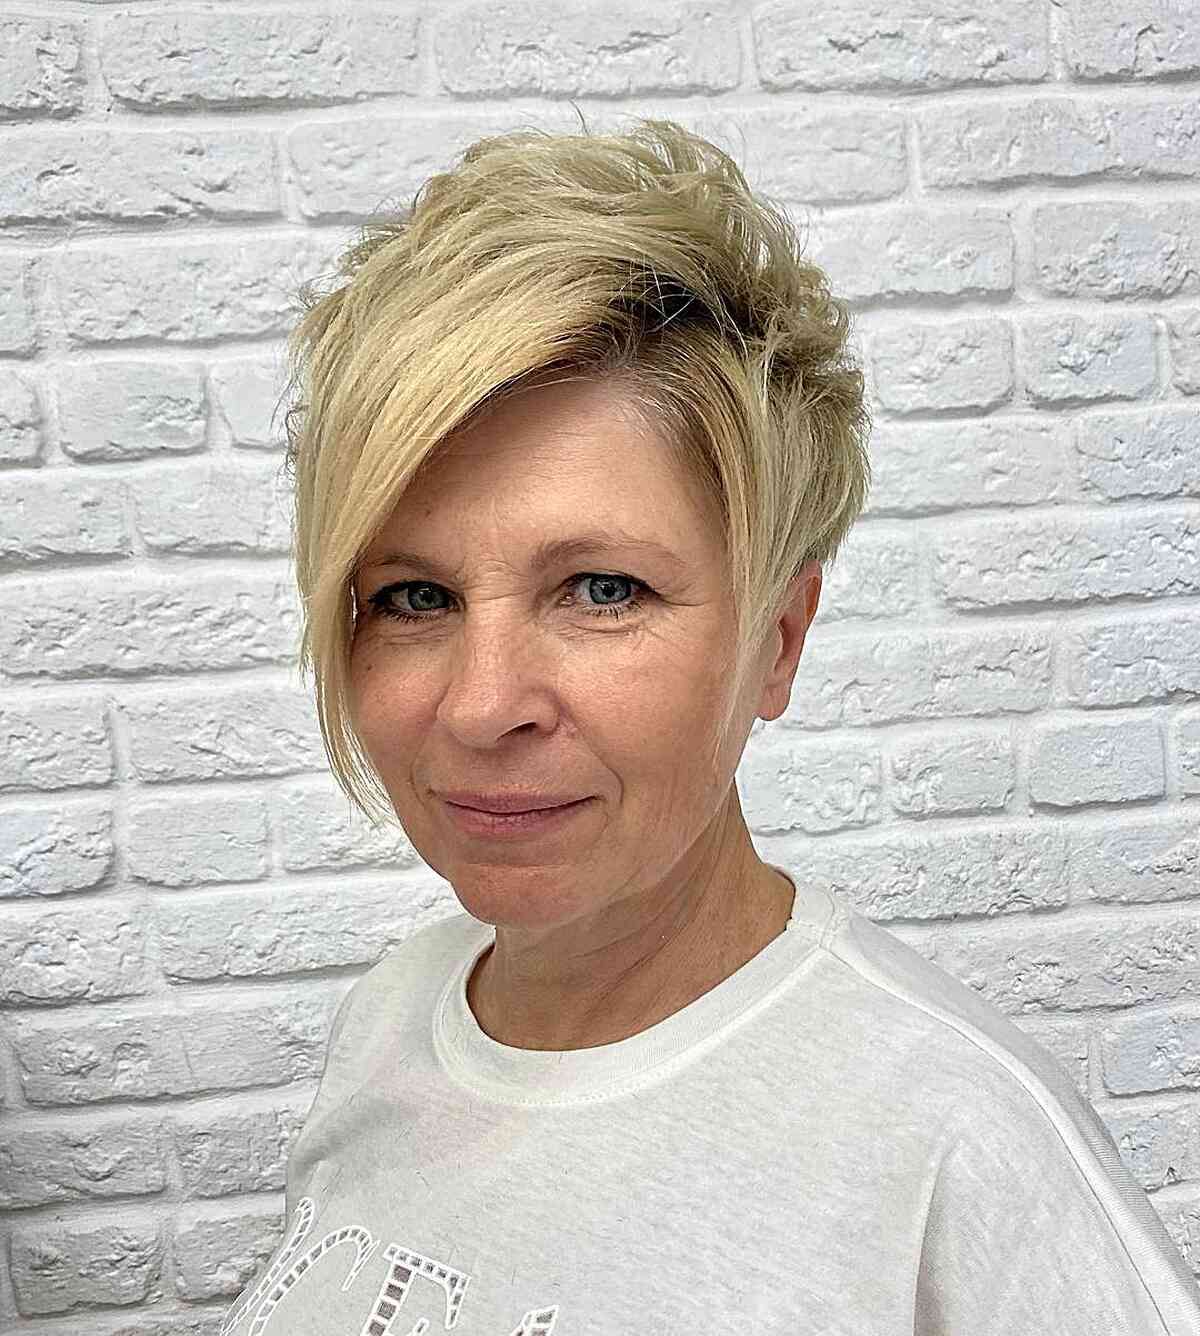 Tousled Short Pixie with Side Bangs for Seniors Aged 60 with Thicker Locks